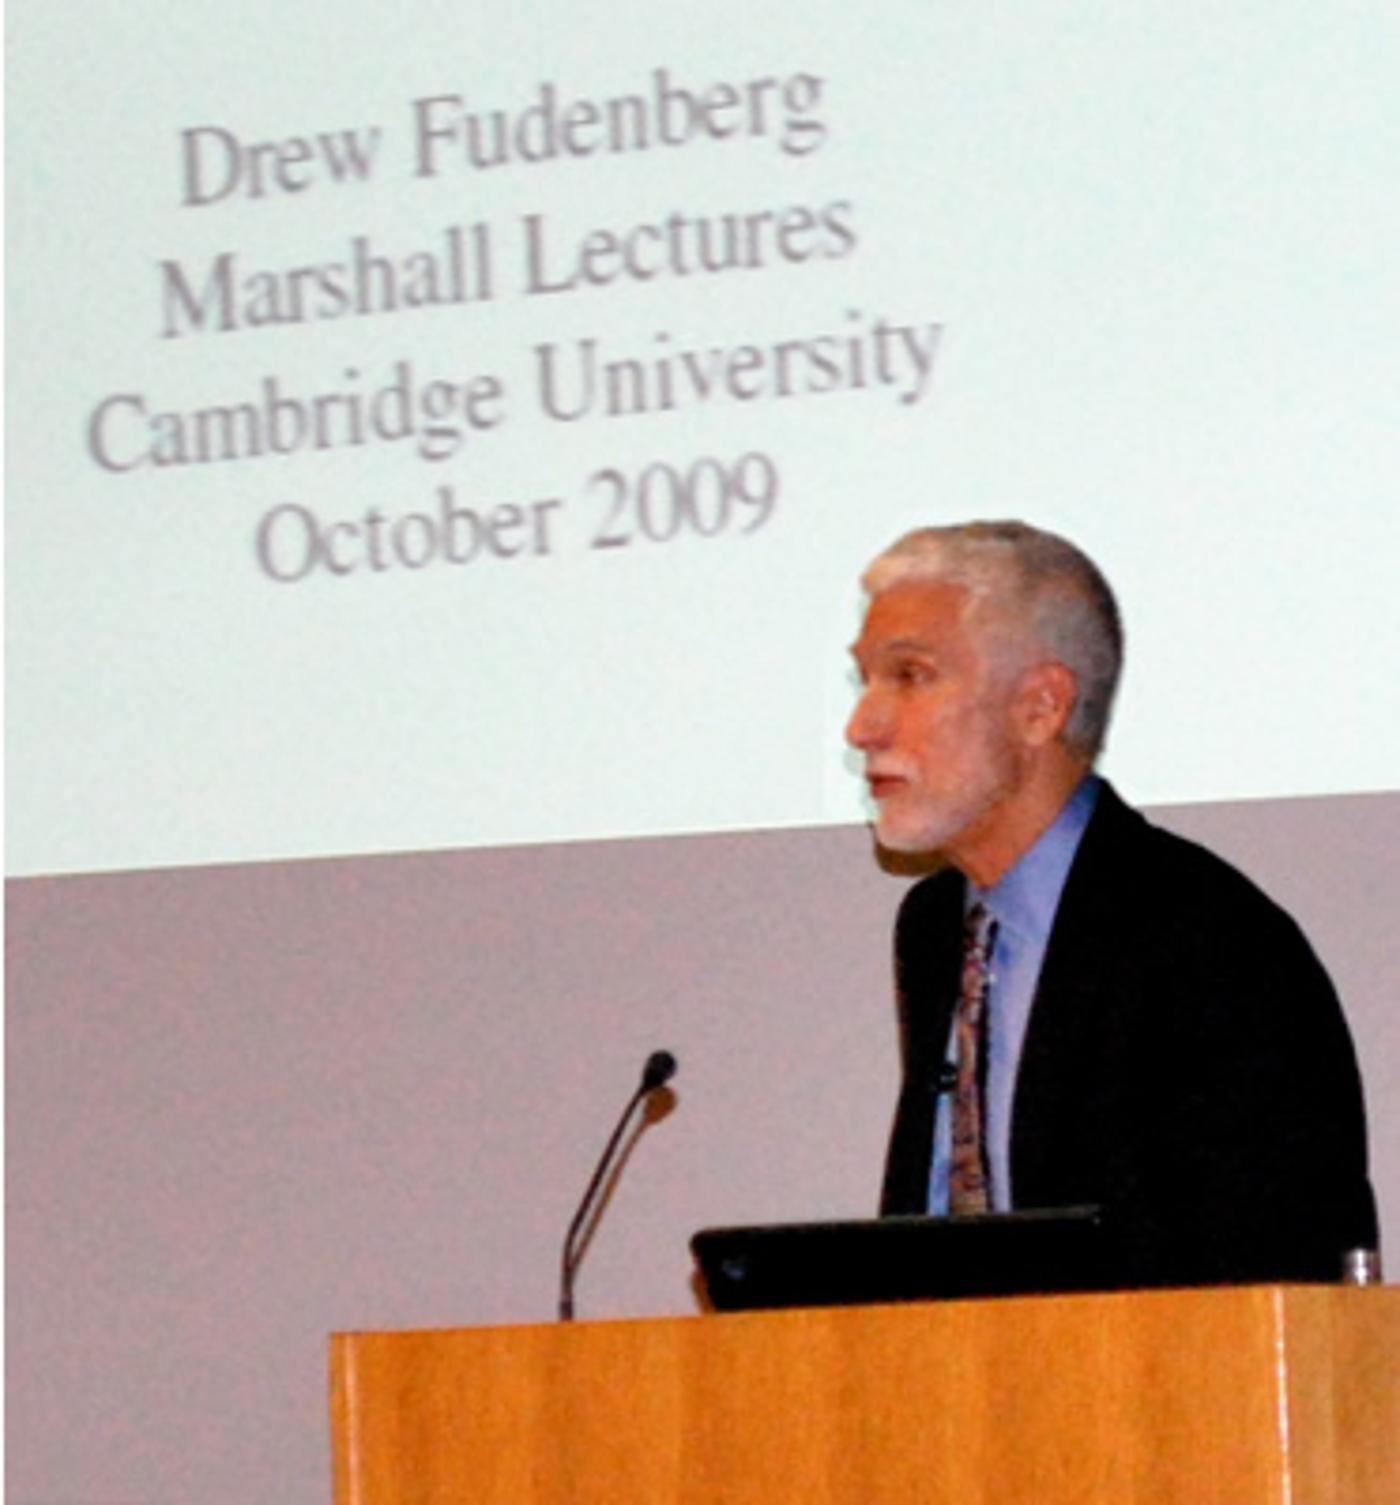 Marshall Lectures 2009 - Professor Drew Fudenberg - Learning and Equilibrium in Games - Lecture 1 - Video